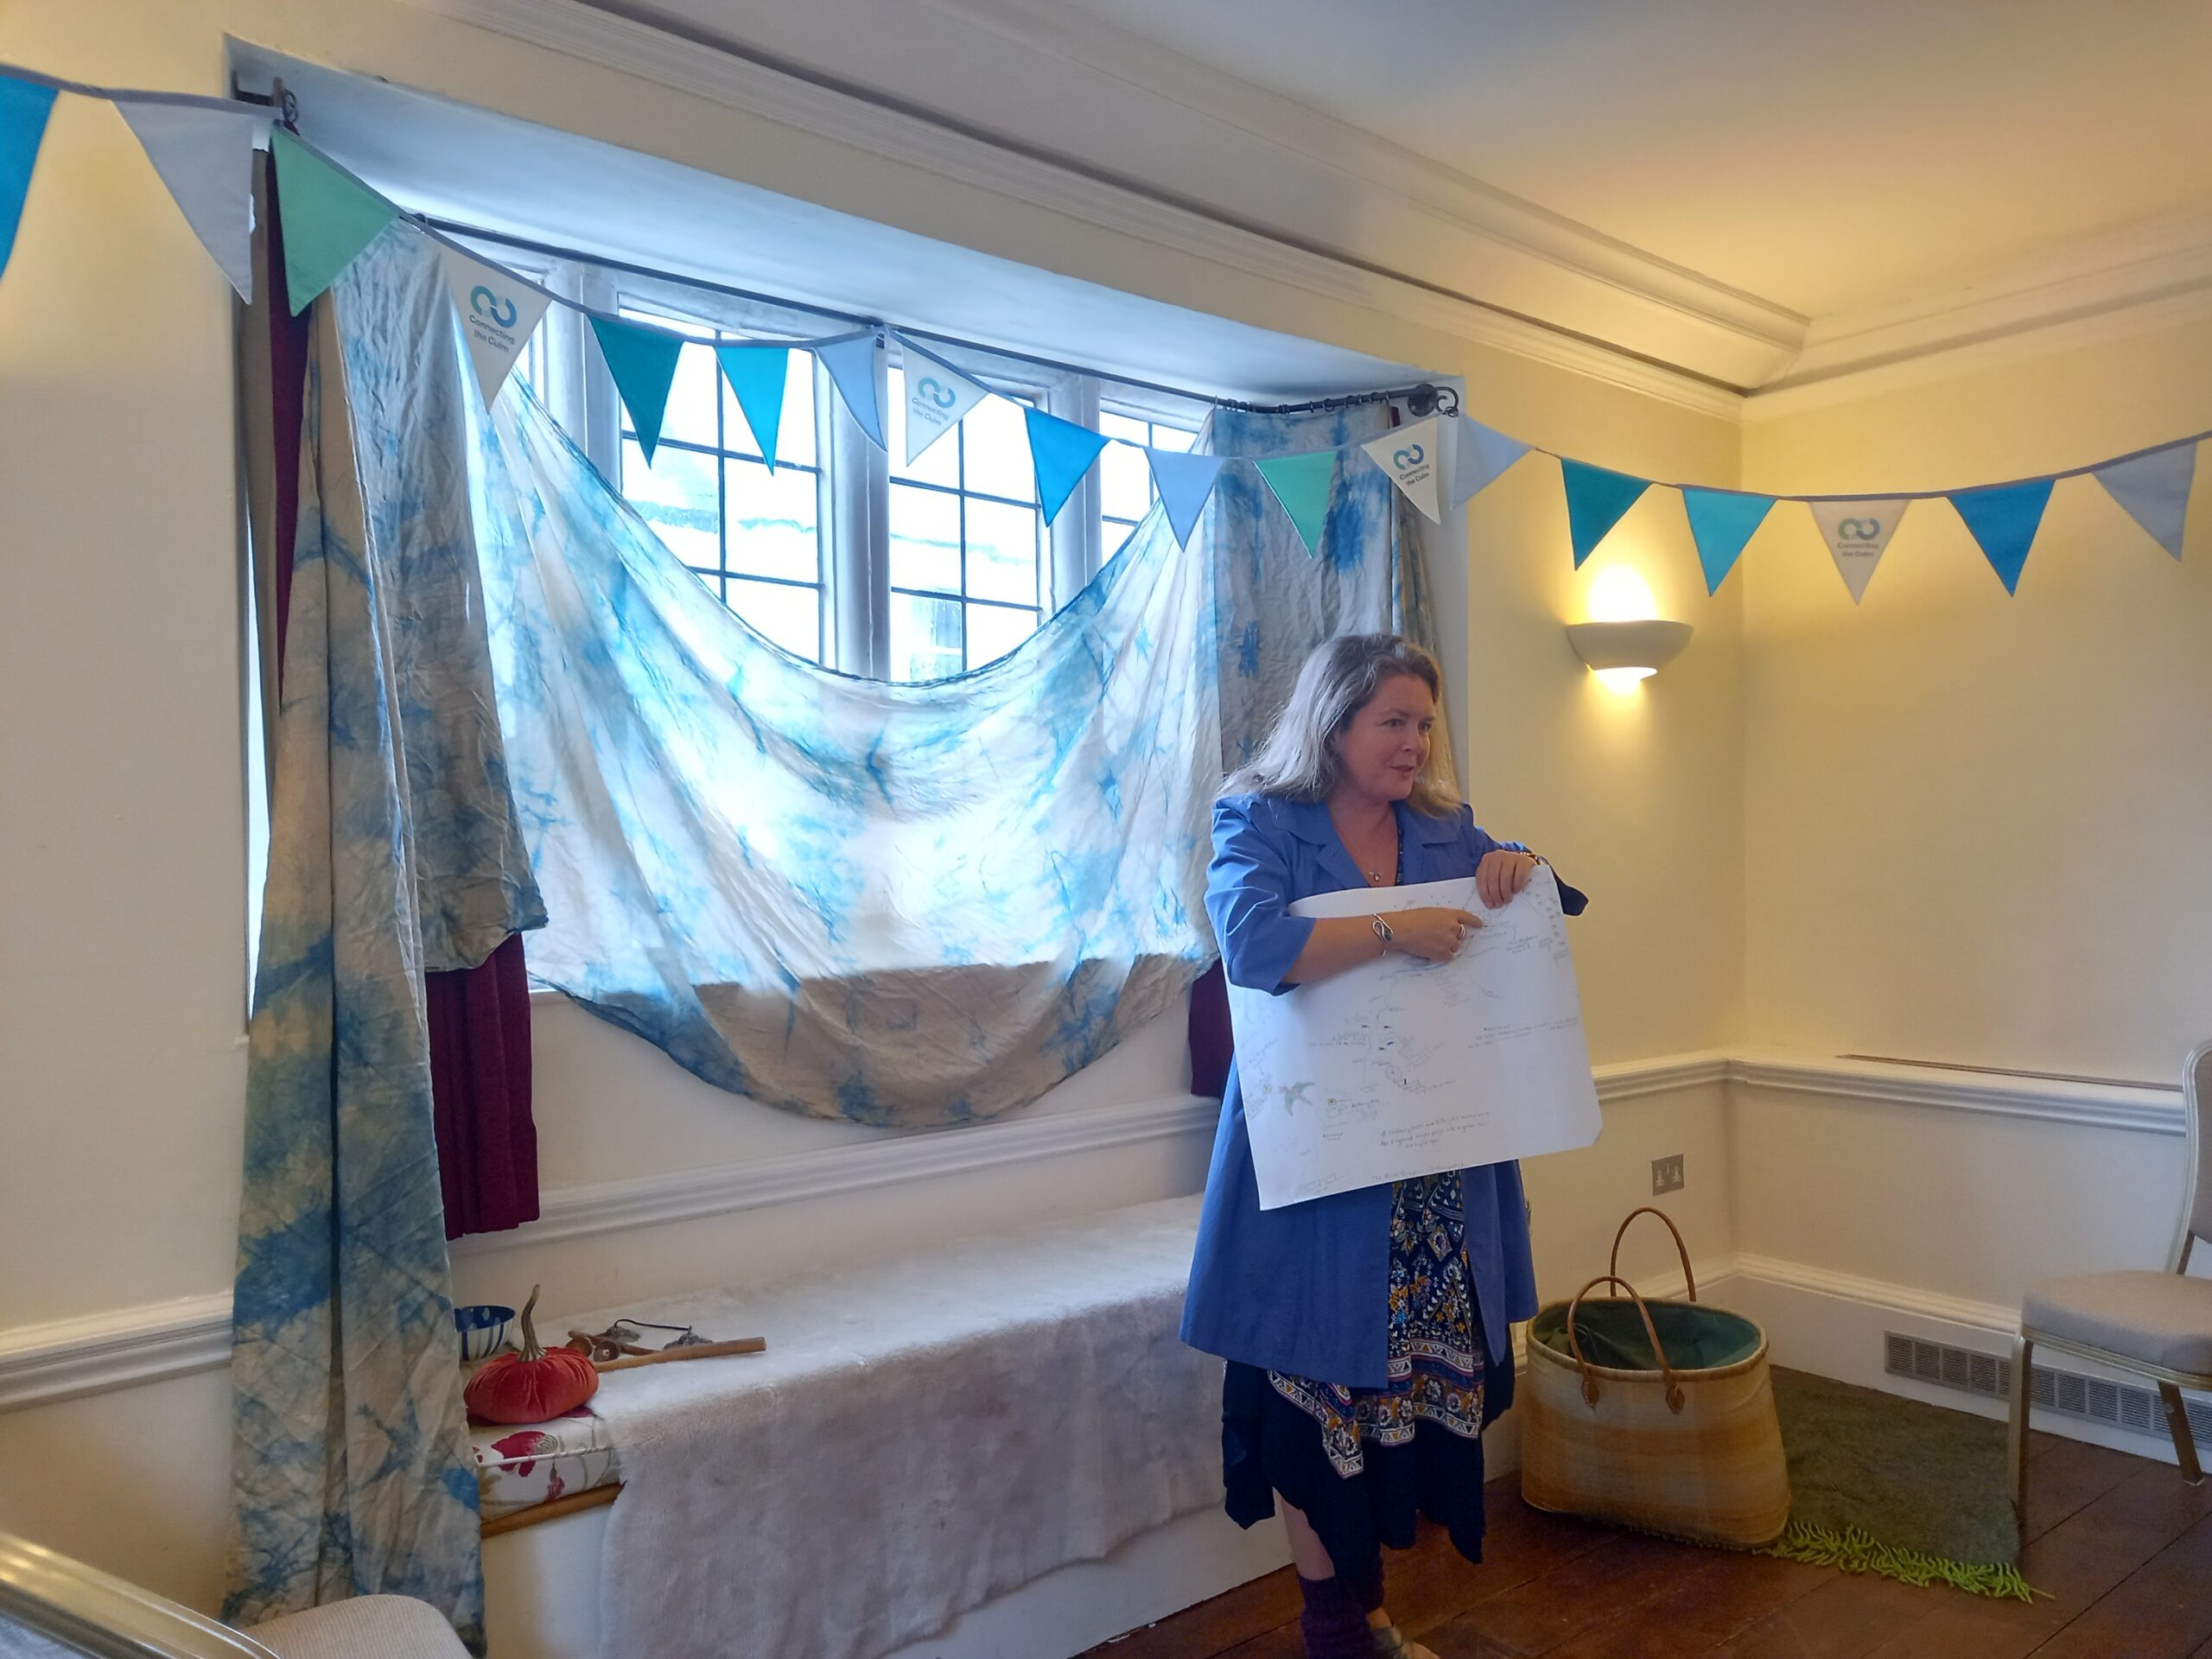 Clare Viner standing in a room decorate with bunting and telling a story.